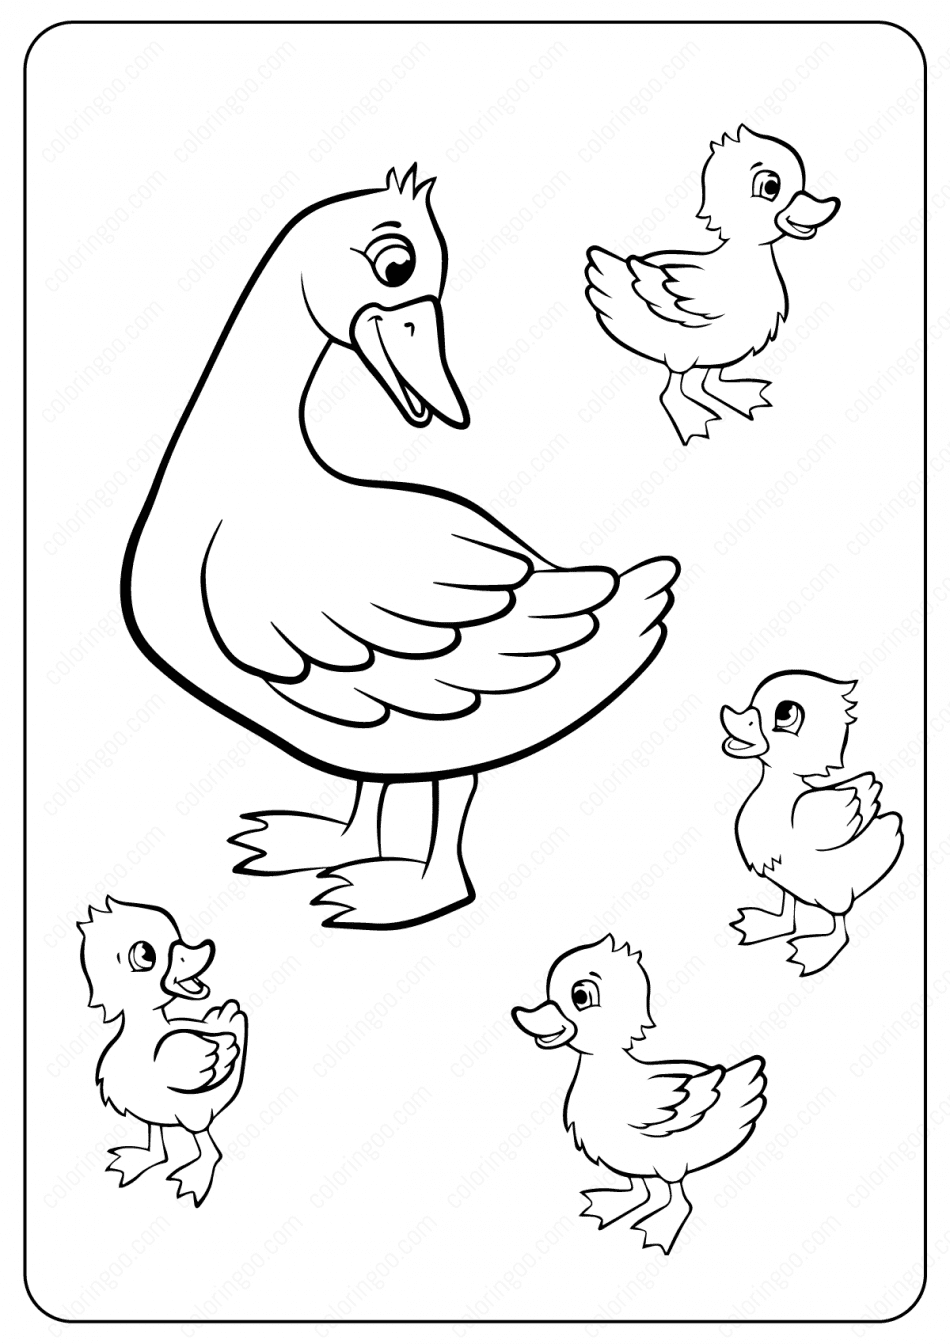 Free Printable Duck Coloring Pages - Free Printable Coloring Pages for Kids